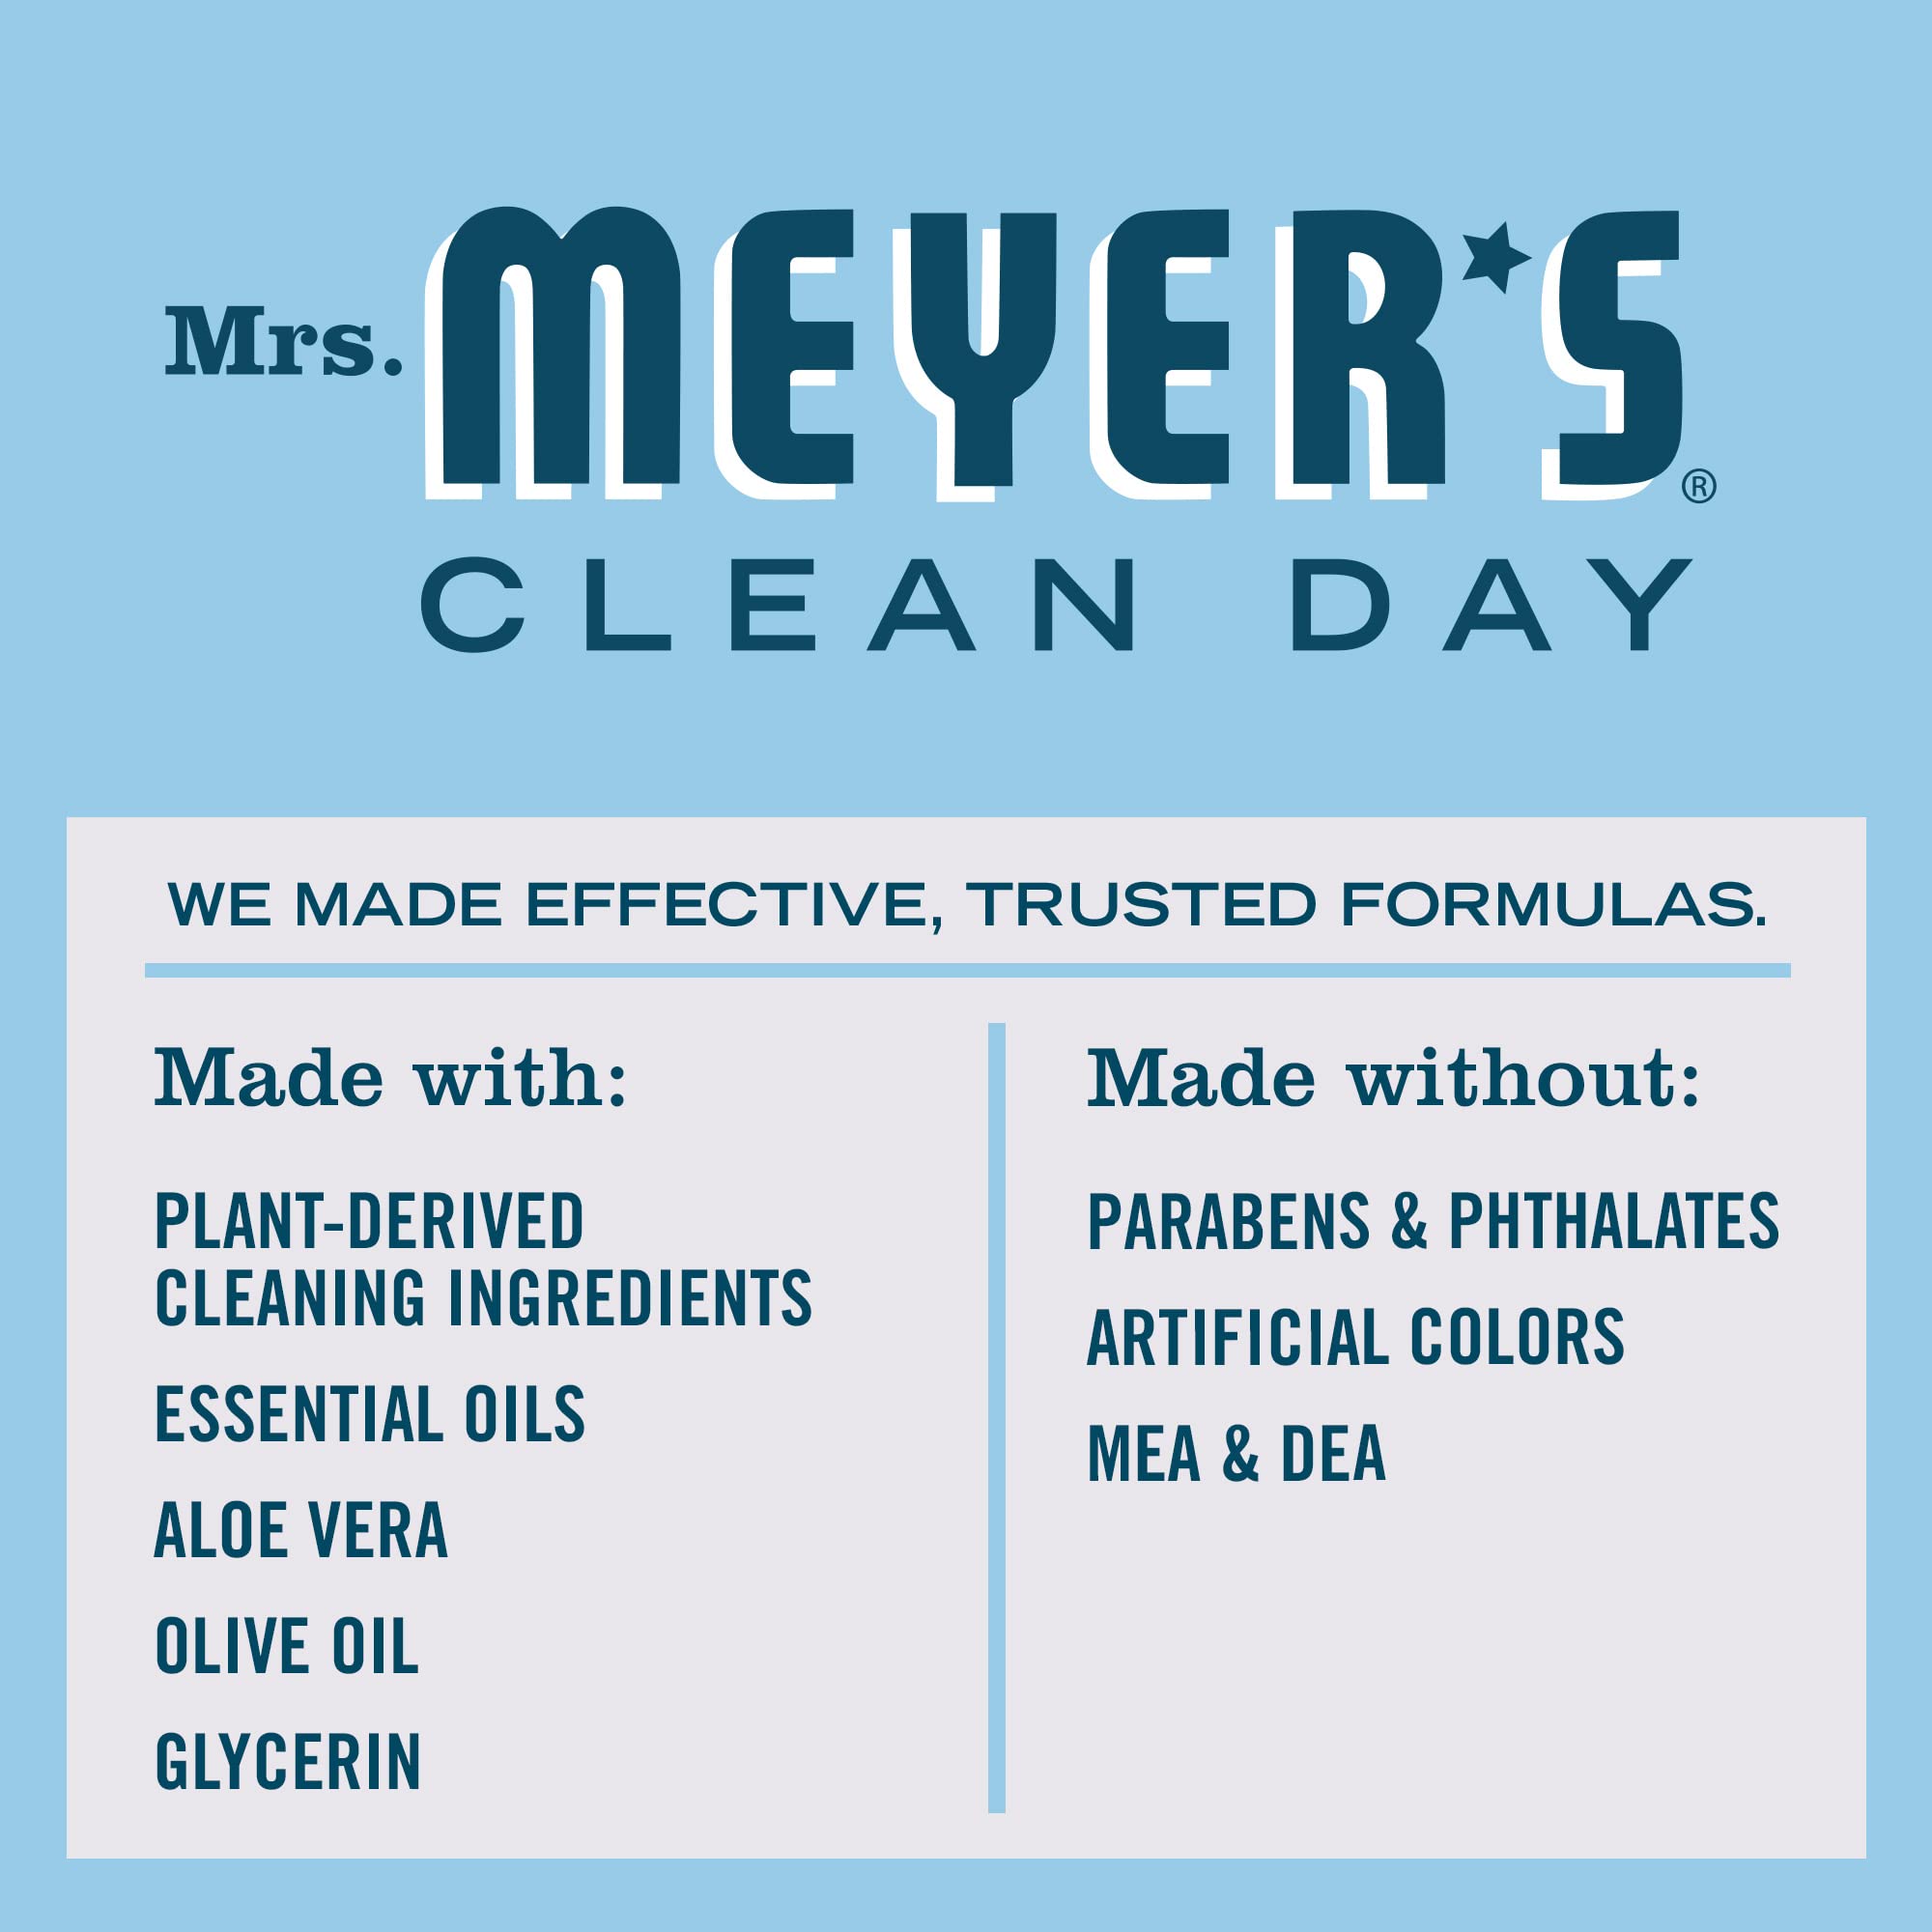 MRS. MEYER'S CLEAN DAY Foaming Hand Soap Concentrated Refills, 4 Concentrated Refills (2 Fl. Oz each), Rain Water Scent, Makes 40 Fl. Oz. of Foaming Soap Total